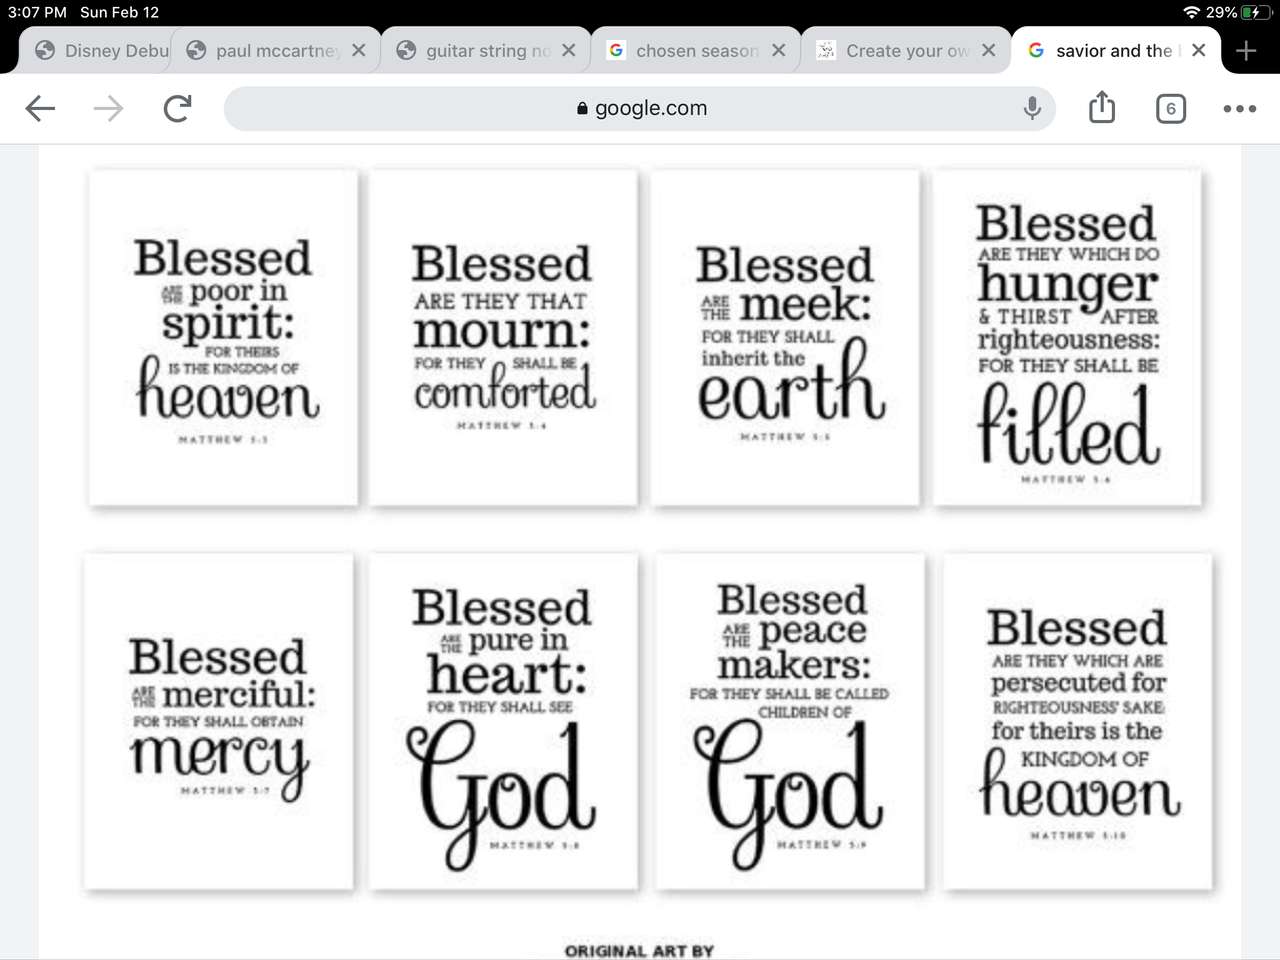 Beatitudes puzzle online from photo